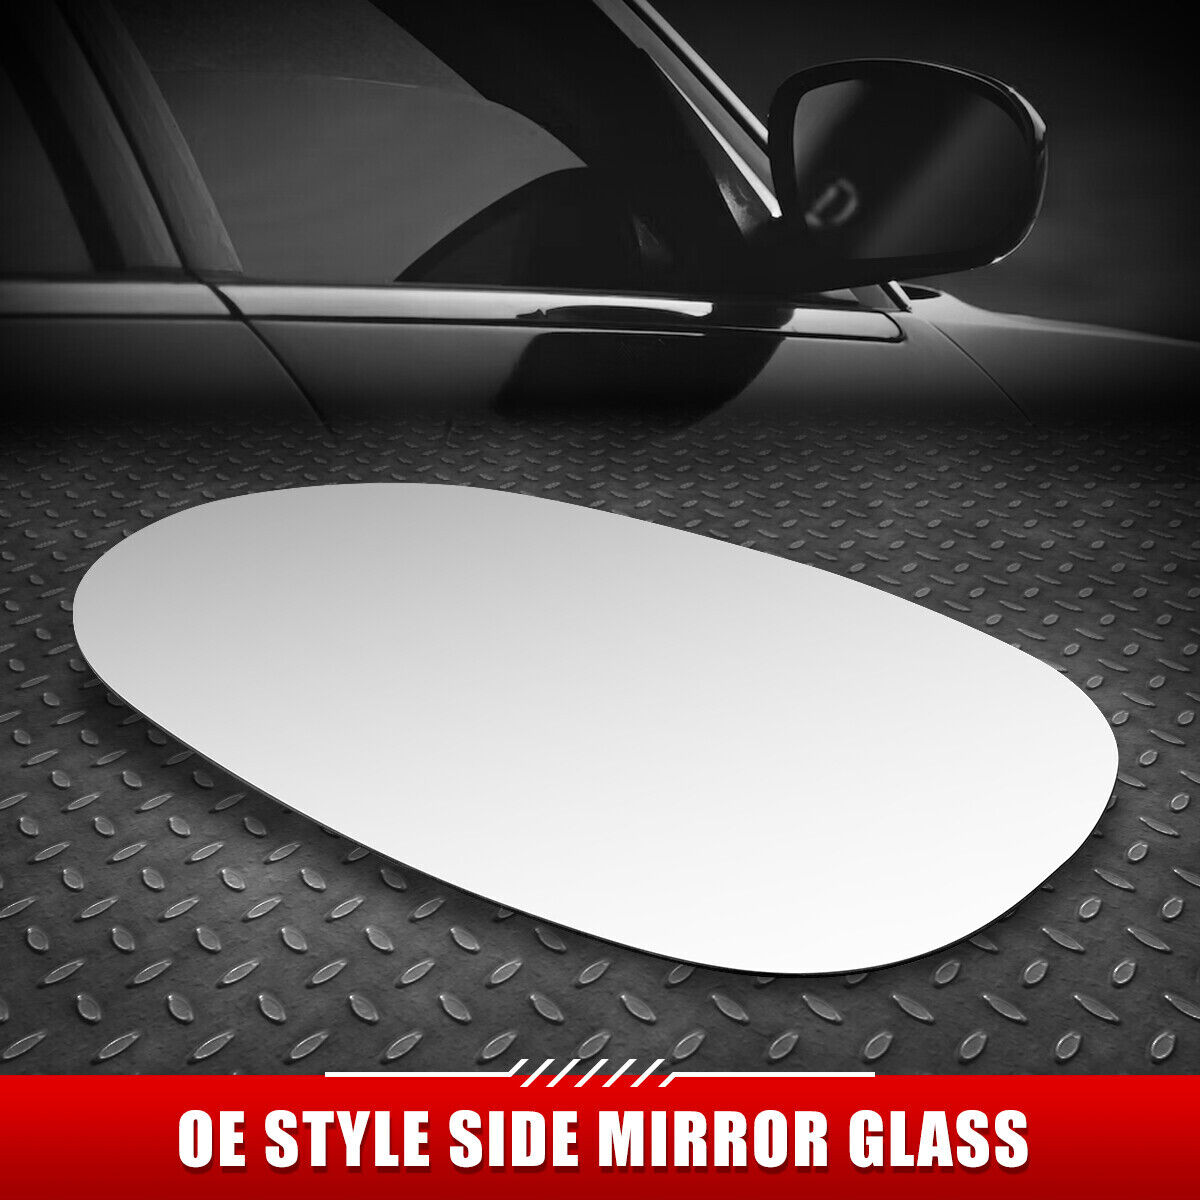 FOR 97-05 CENTURY REGAL INTRIGUE OE STYLE DRIVER SIDE MIRROR FLAT GLASS LENS